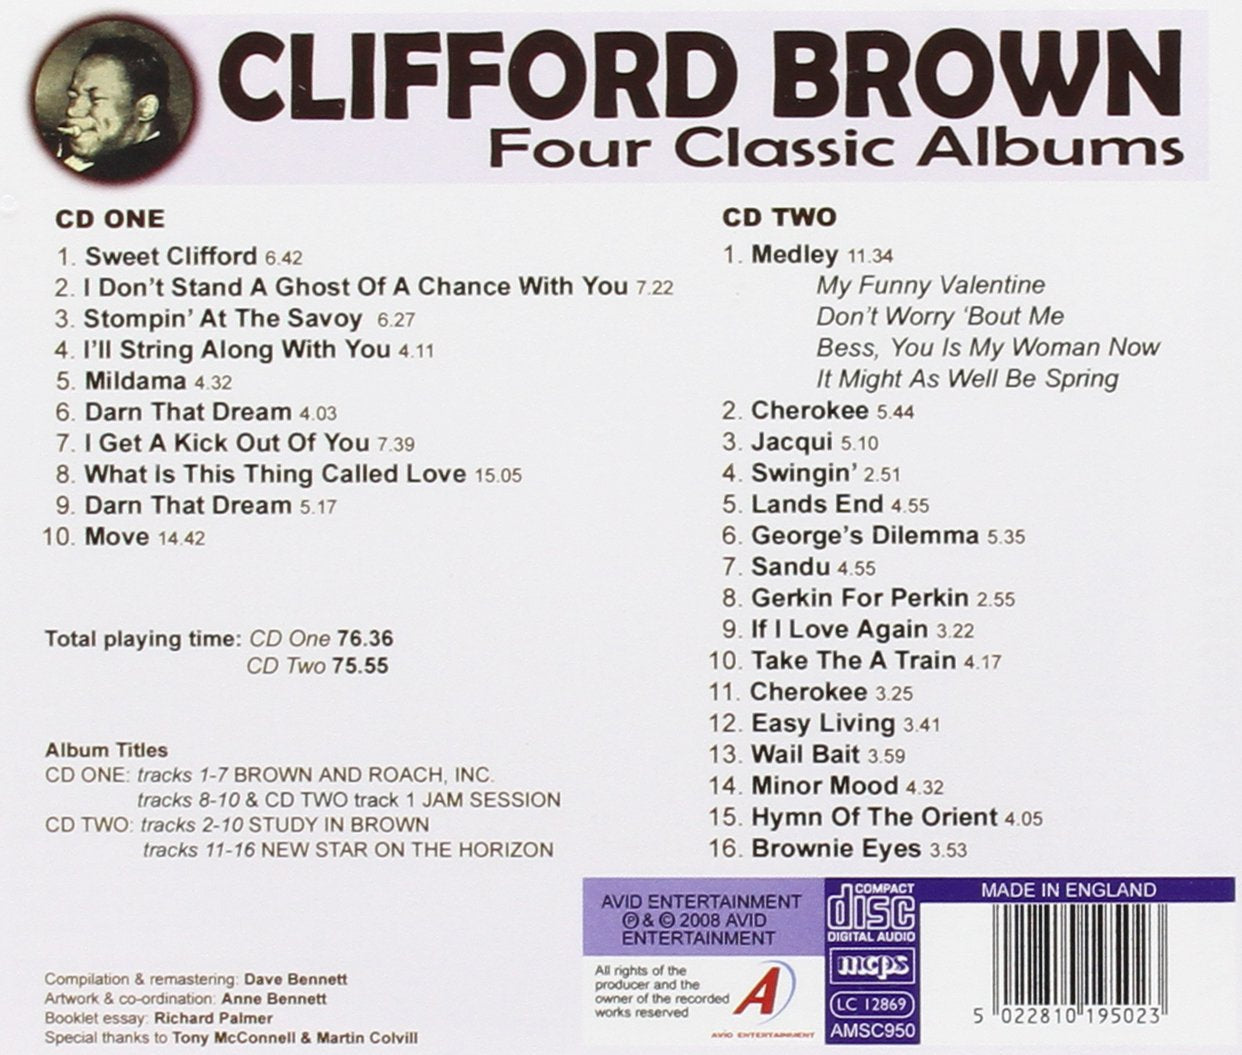 CLIFFORD BROWN: FOUR CLASSIC ALBUMS (BROWN AND ROACH INC / JAM